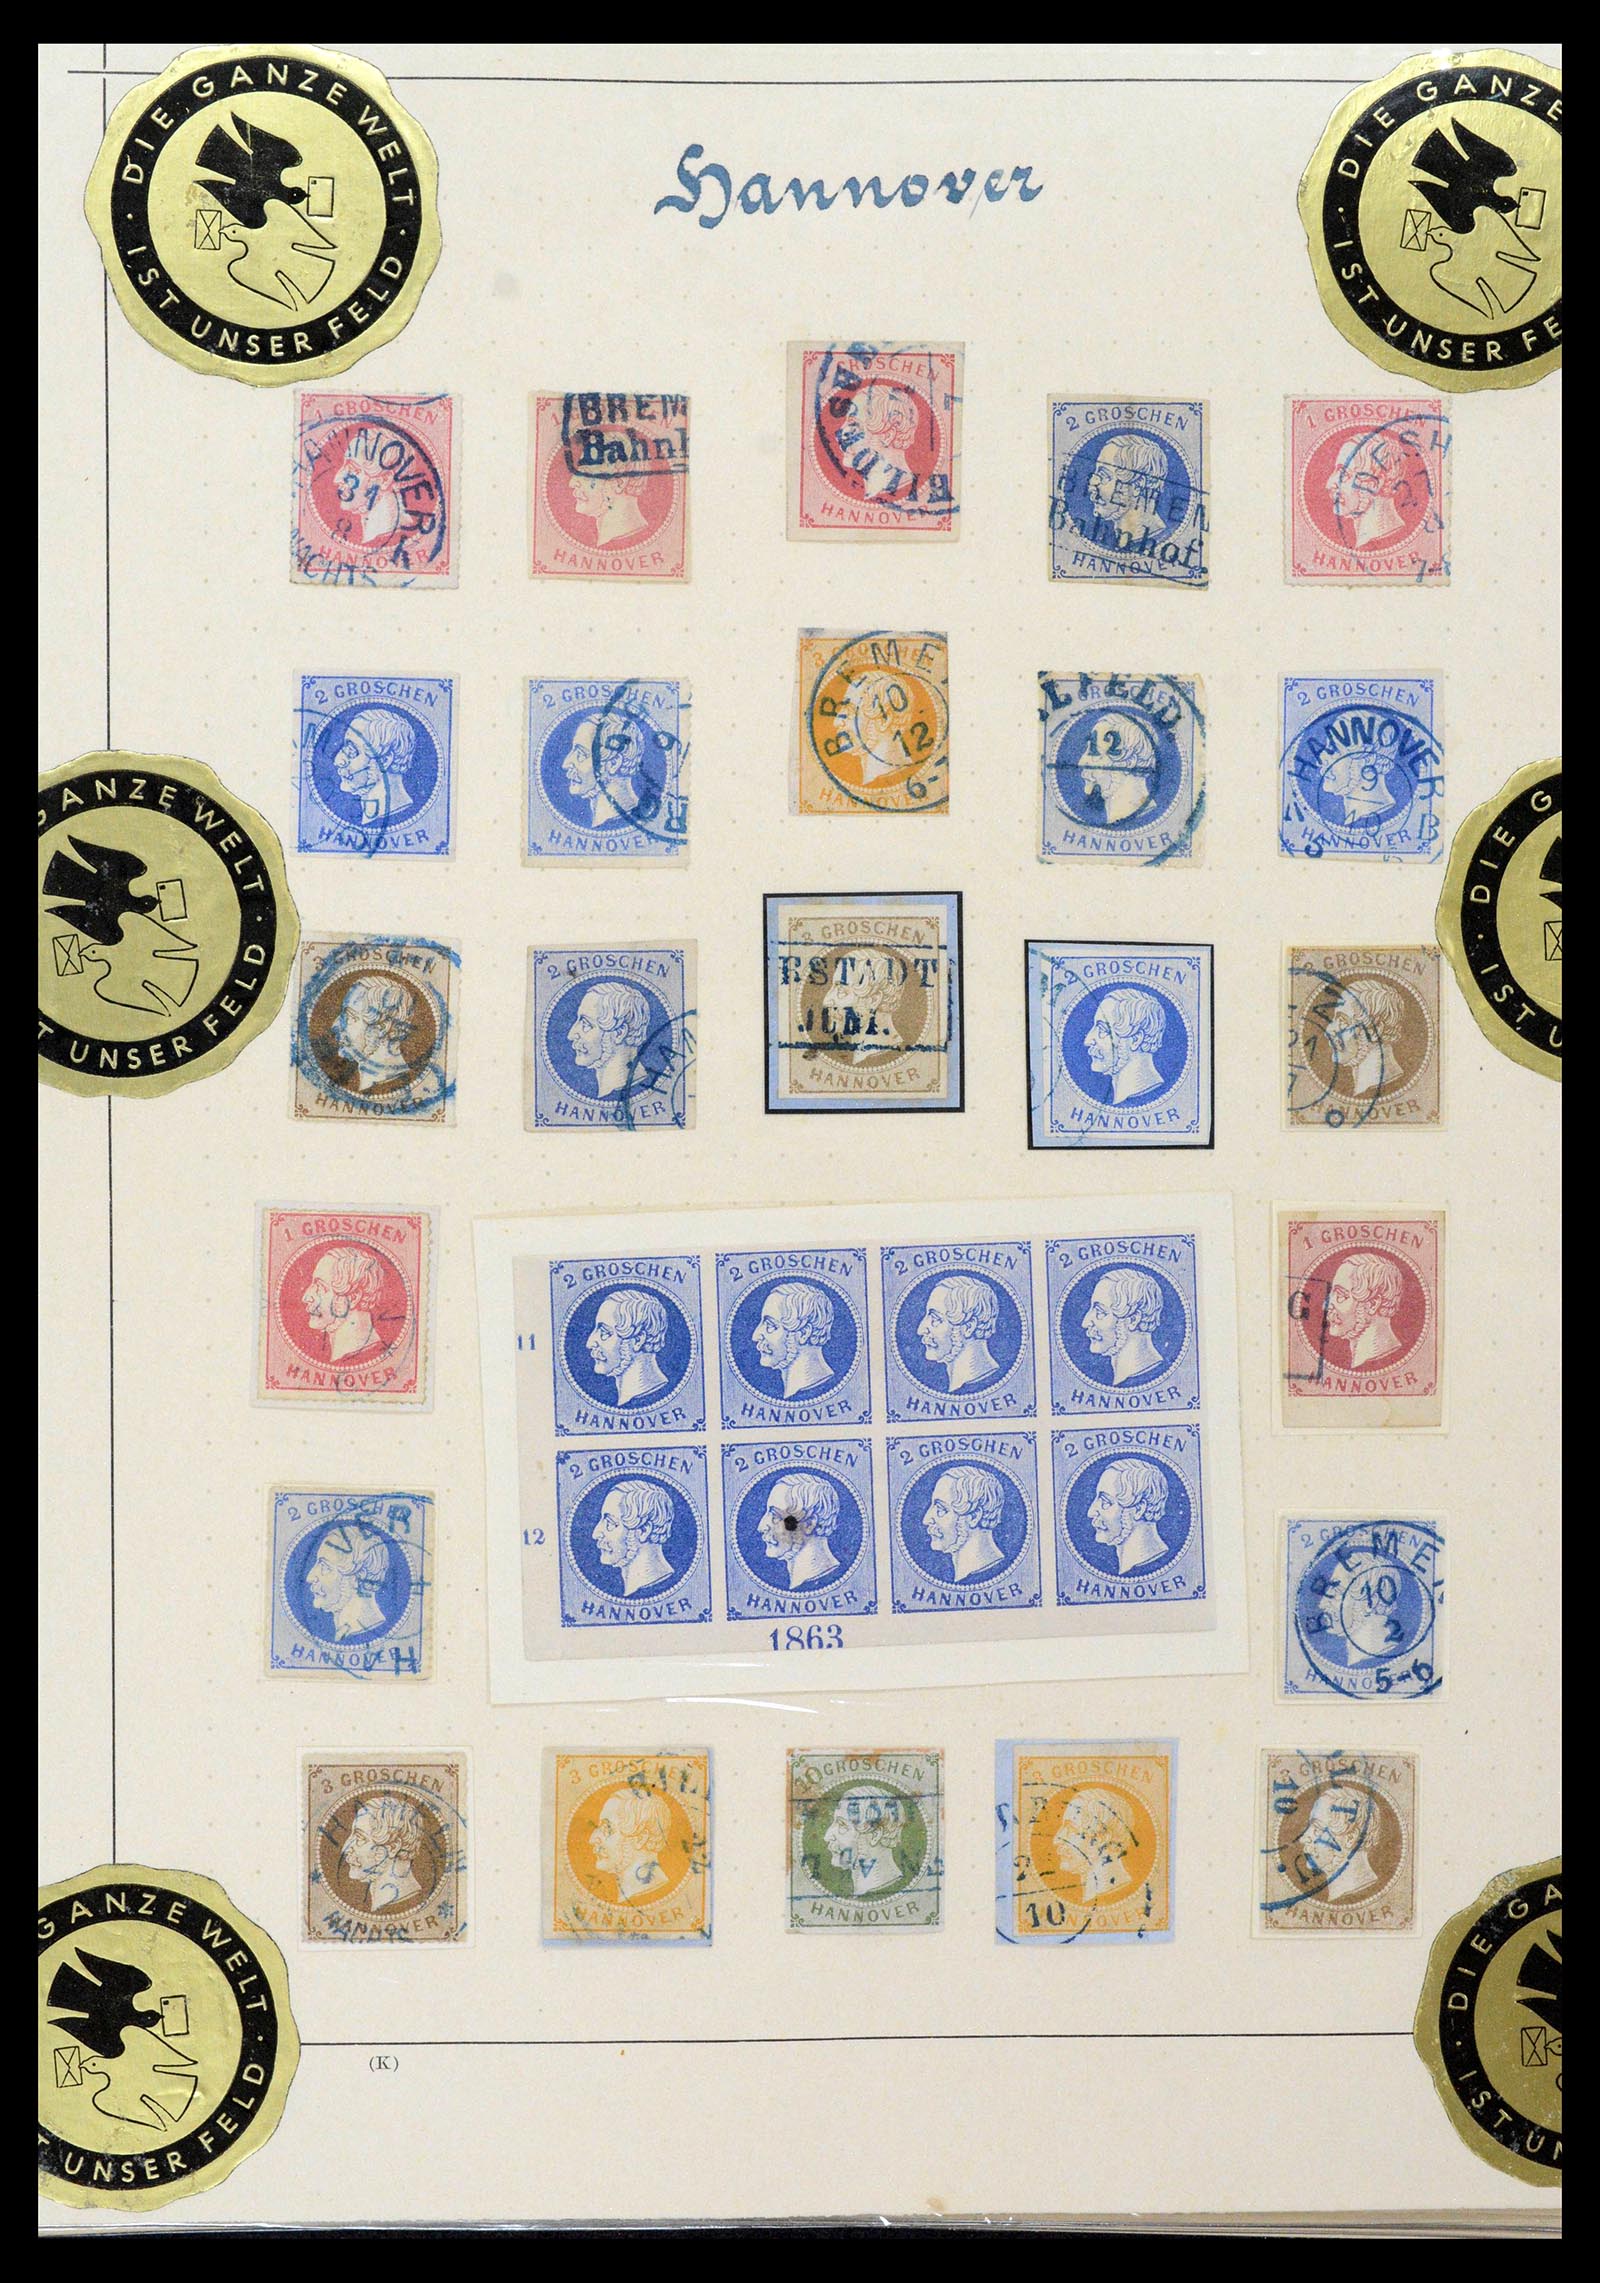 39200 0013 - Stamp collection 39200 Hannover SUPER collection 1850-1864.